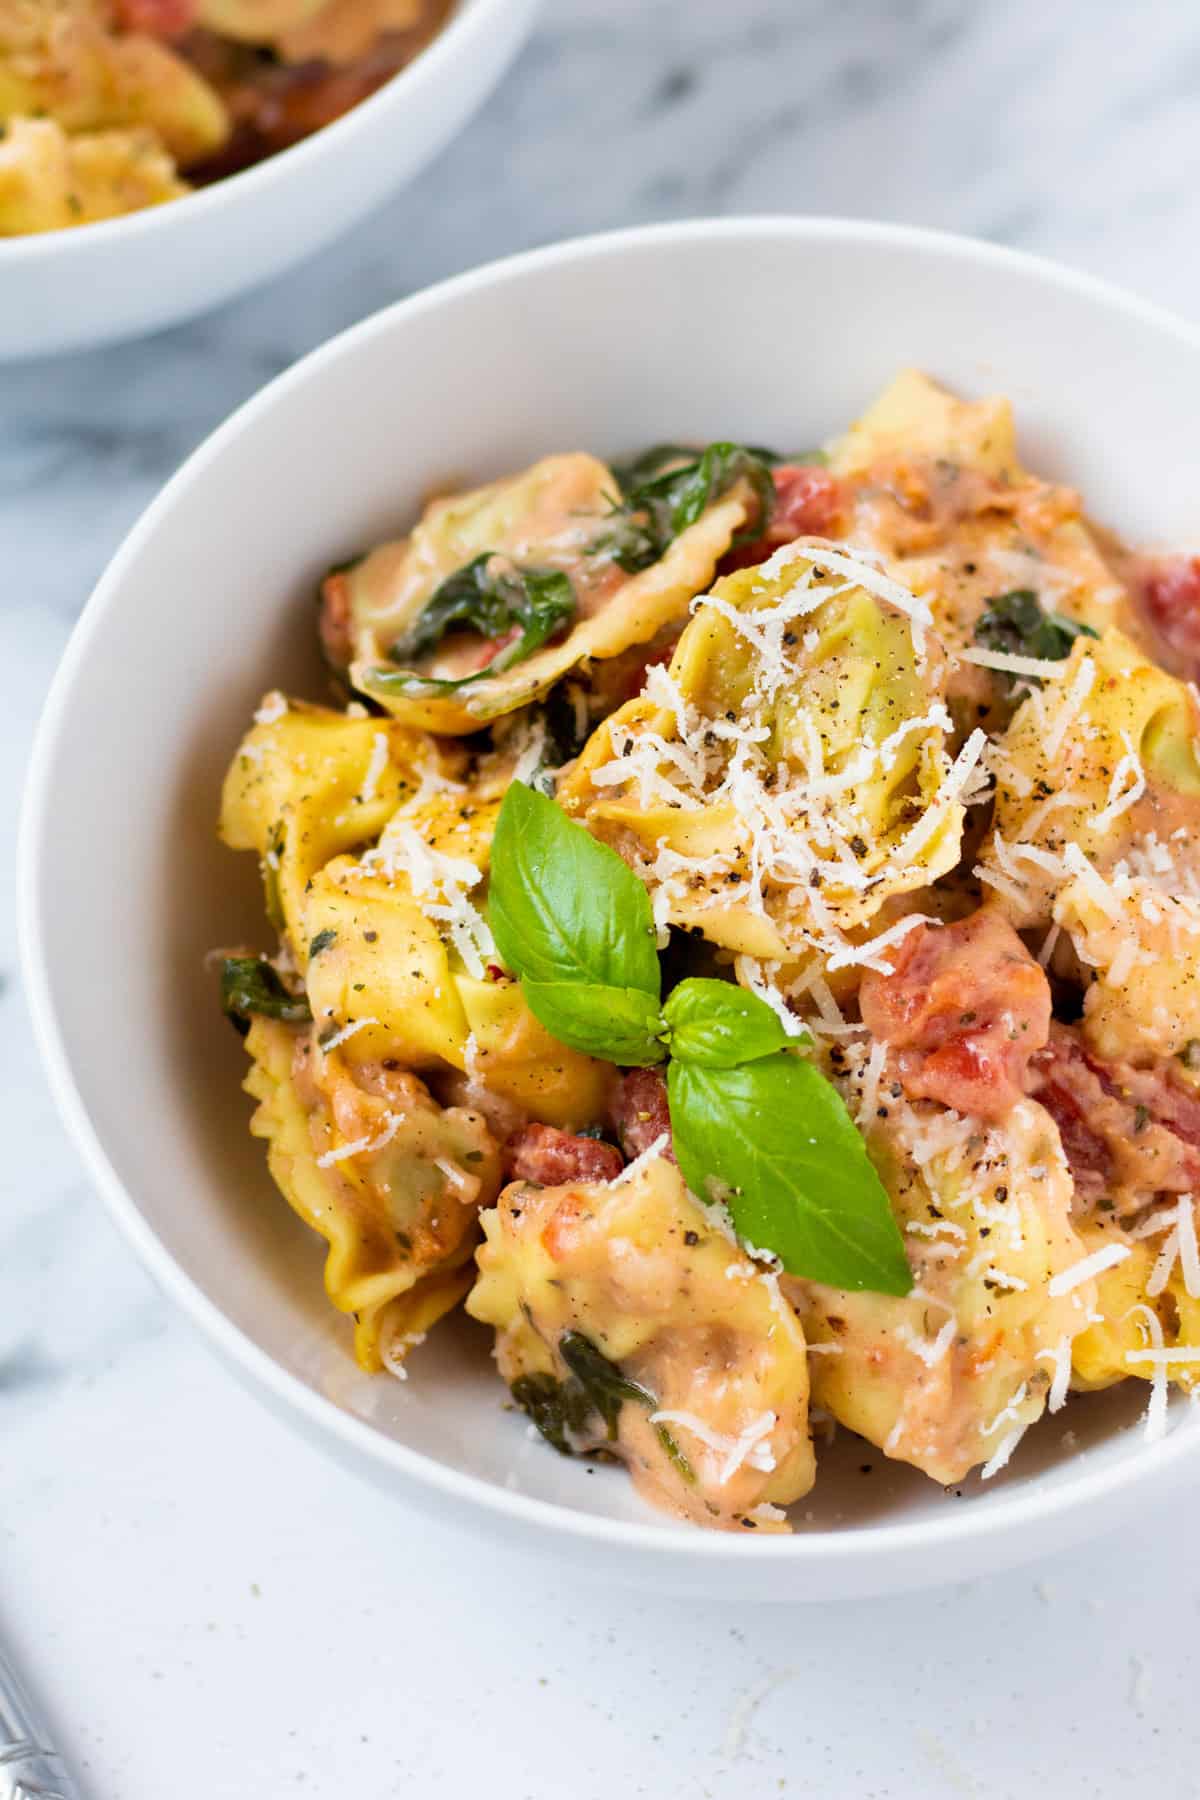 tomato and spinach cream sauce mixed with tortellini and topped with fresh basil and parmesan cheese in a white bowl